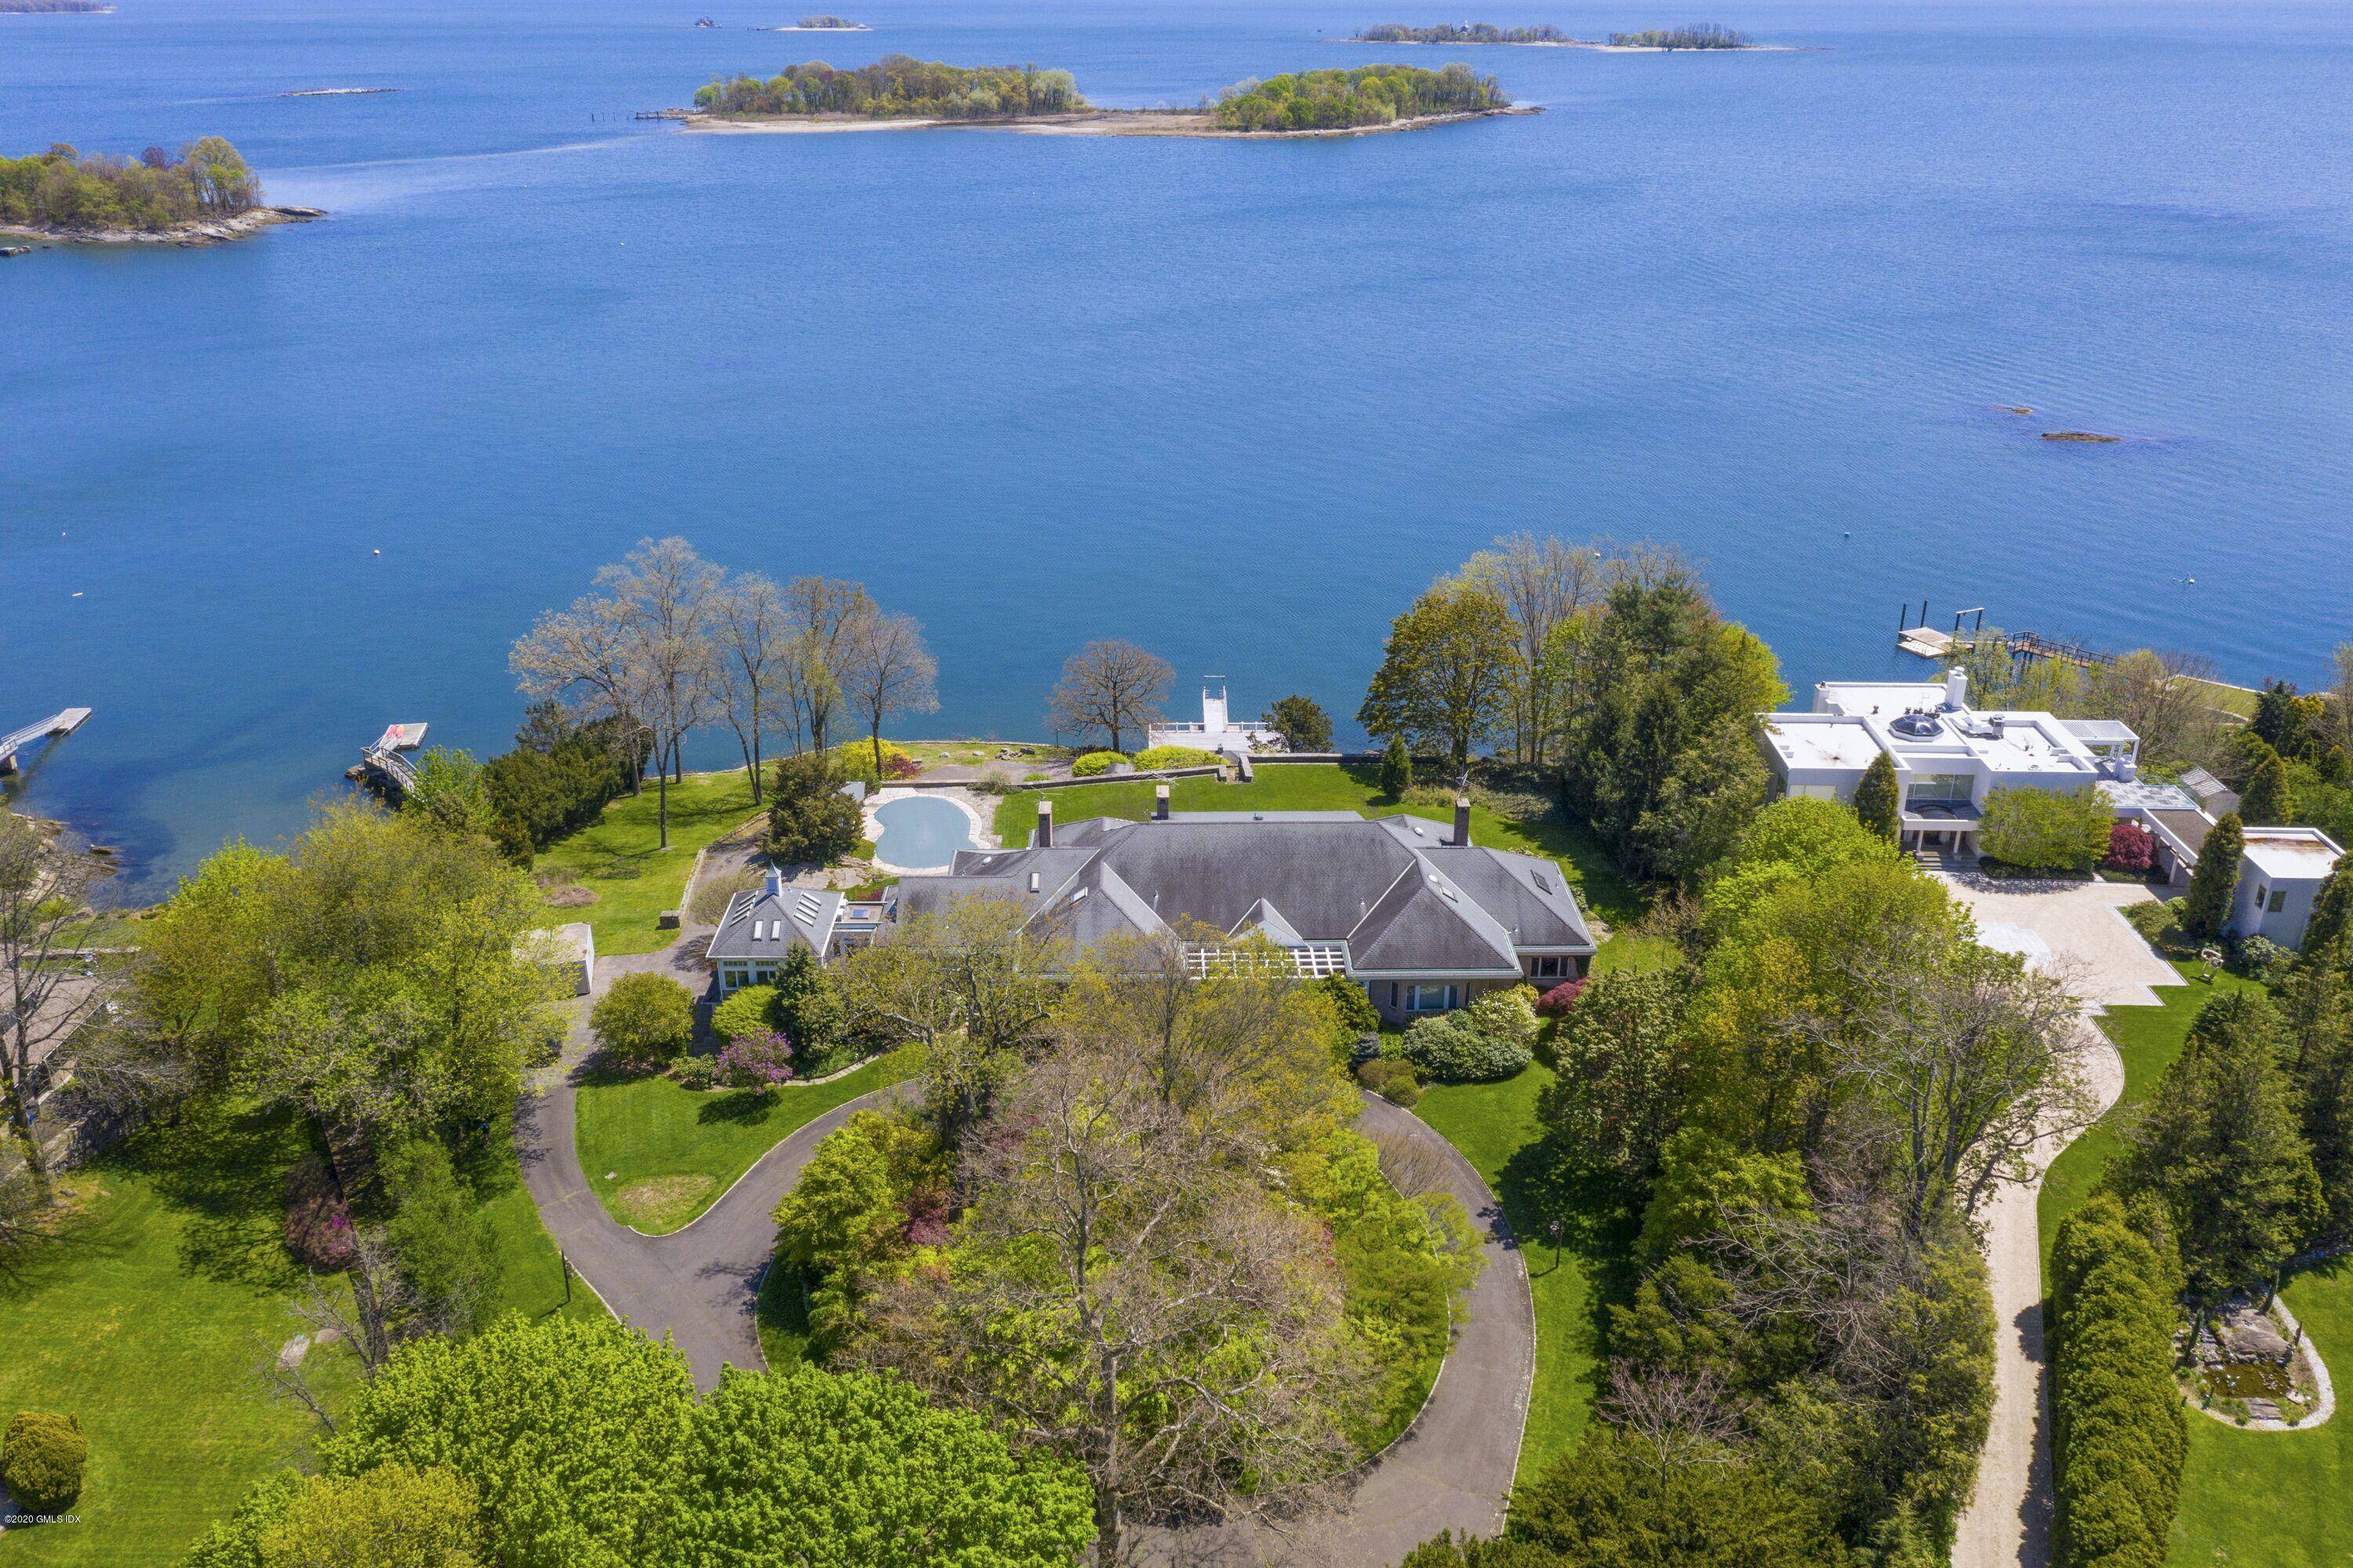 Dazzling in sunshine, blue skies and shimmering Long Island Sound views, is a magnificent 2.